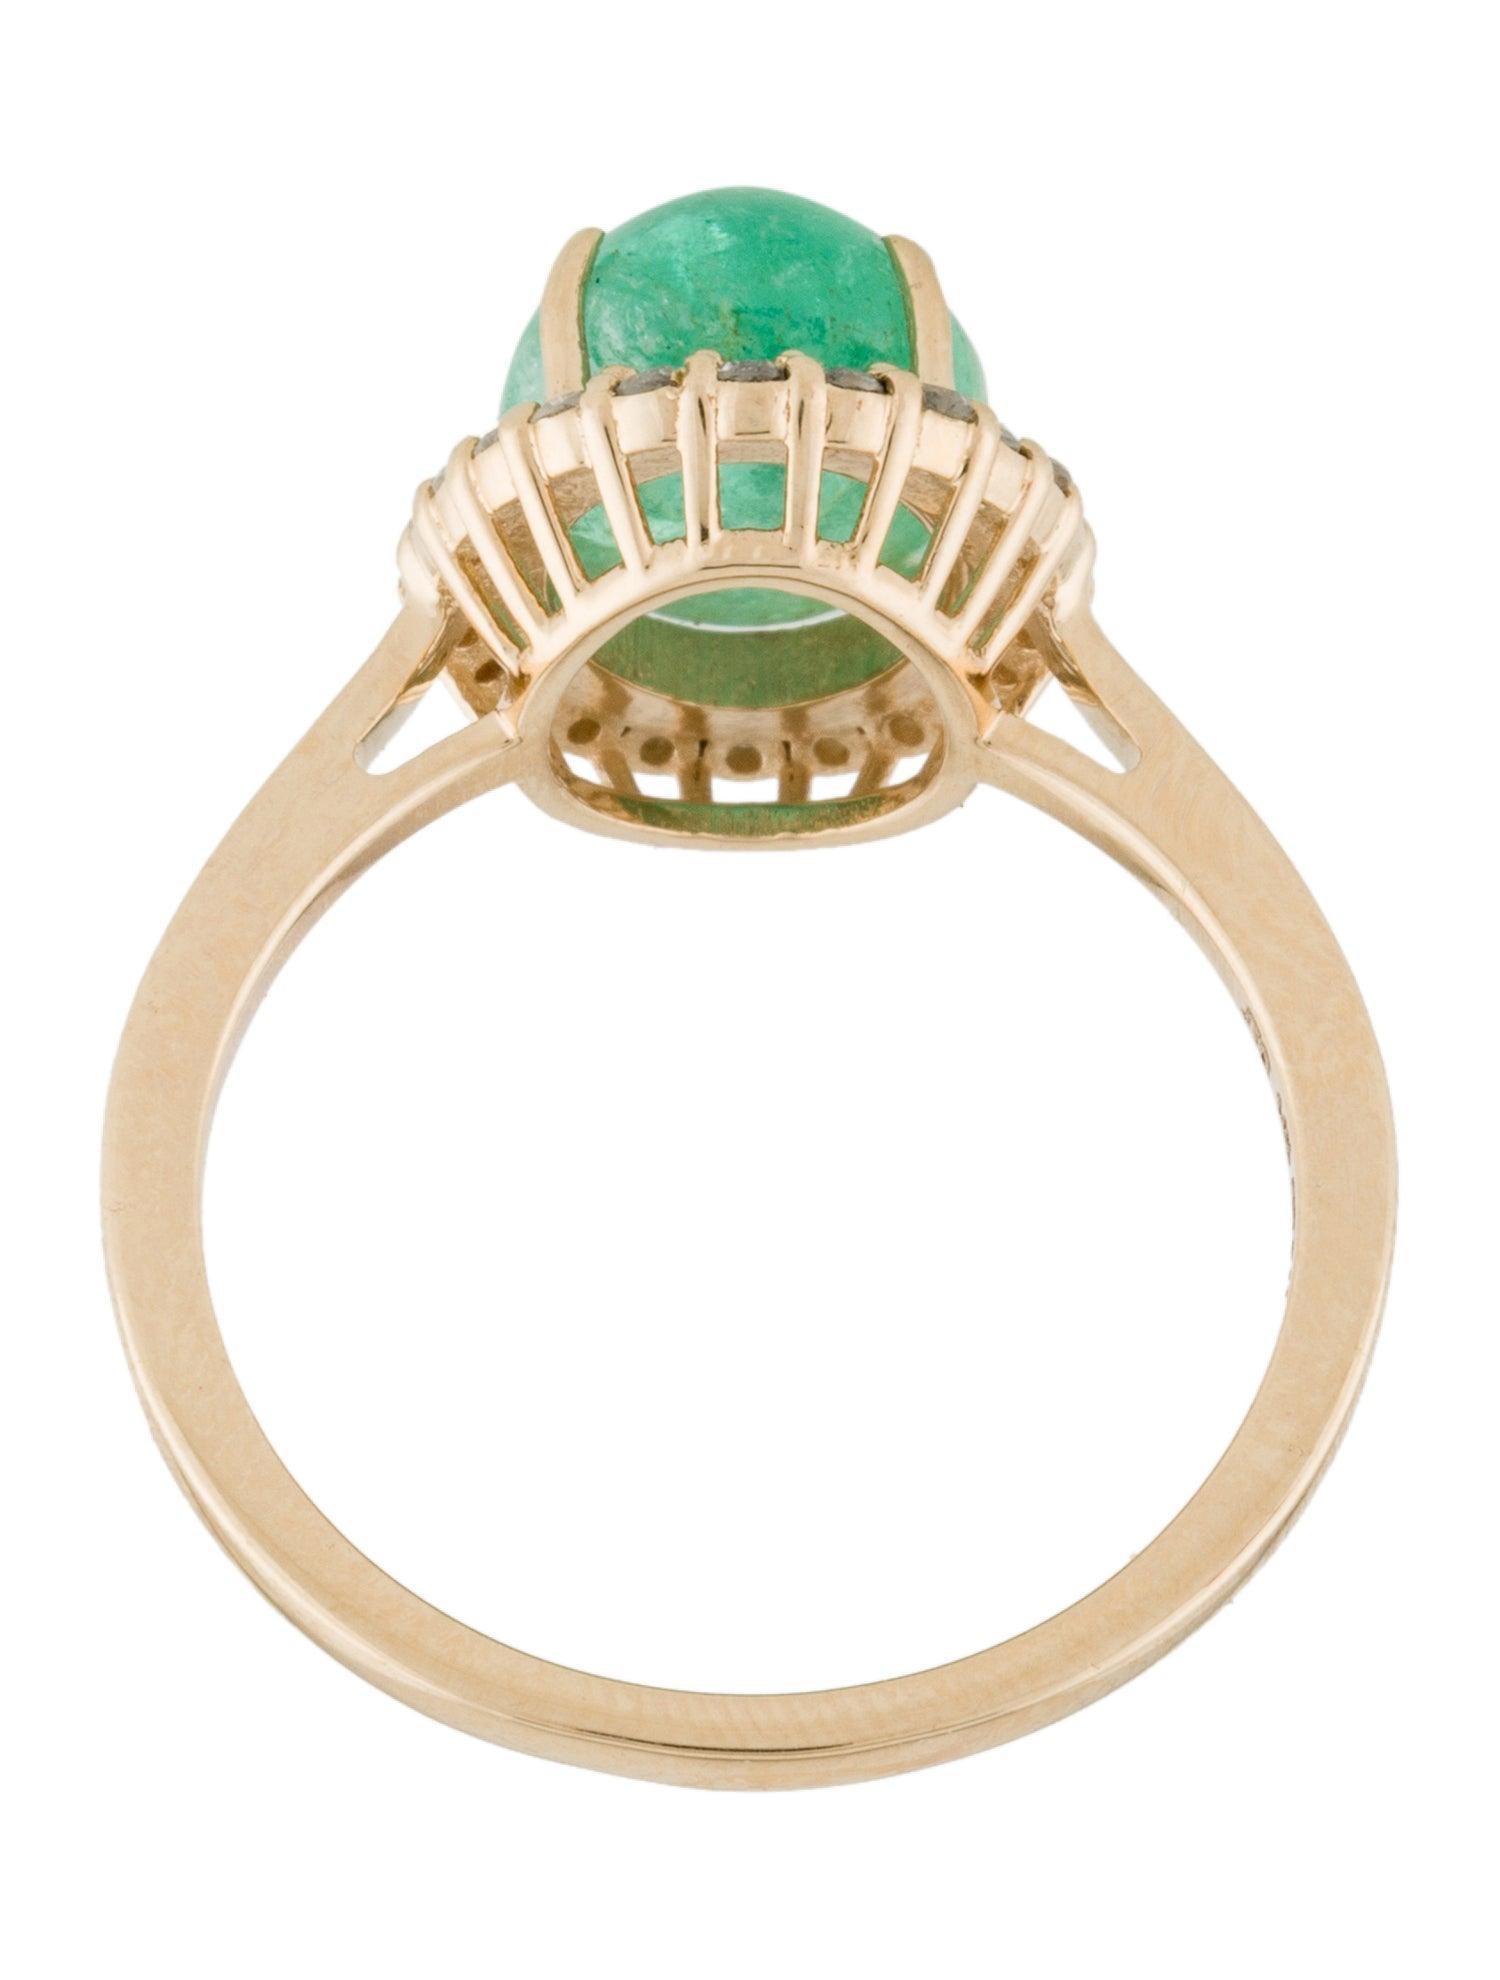 Luxurious 14K Emerald & Diamond Cocktail Ring - 3.59ct Gemstone - Size 6.75 In New Condition For Sale In Holtsville, NY